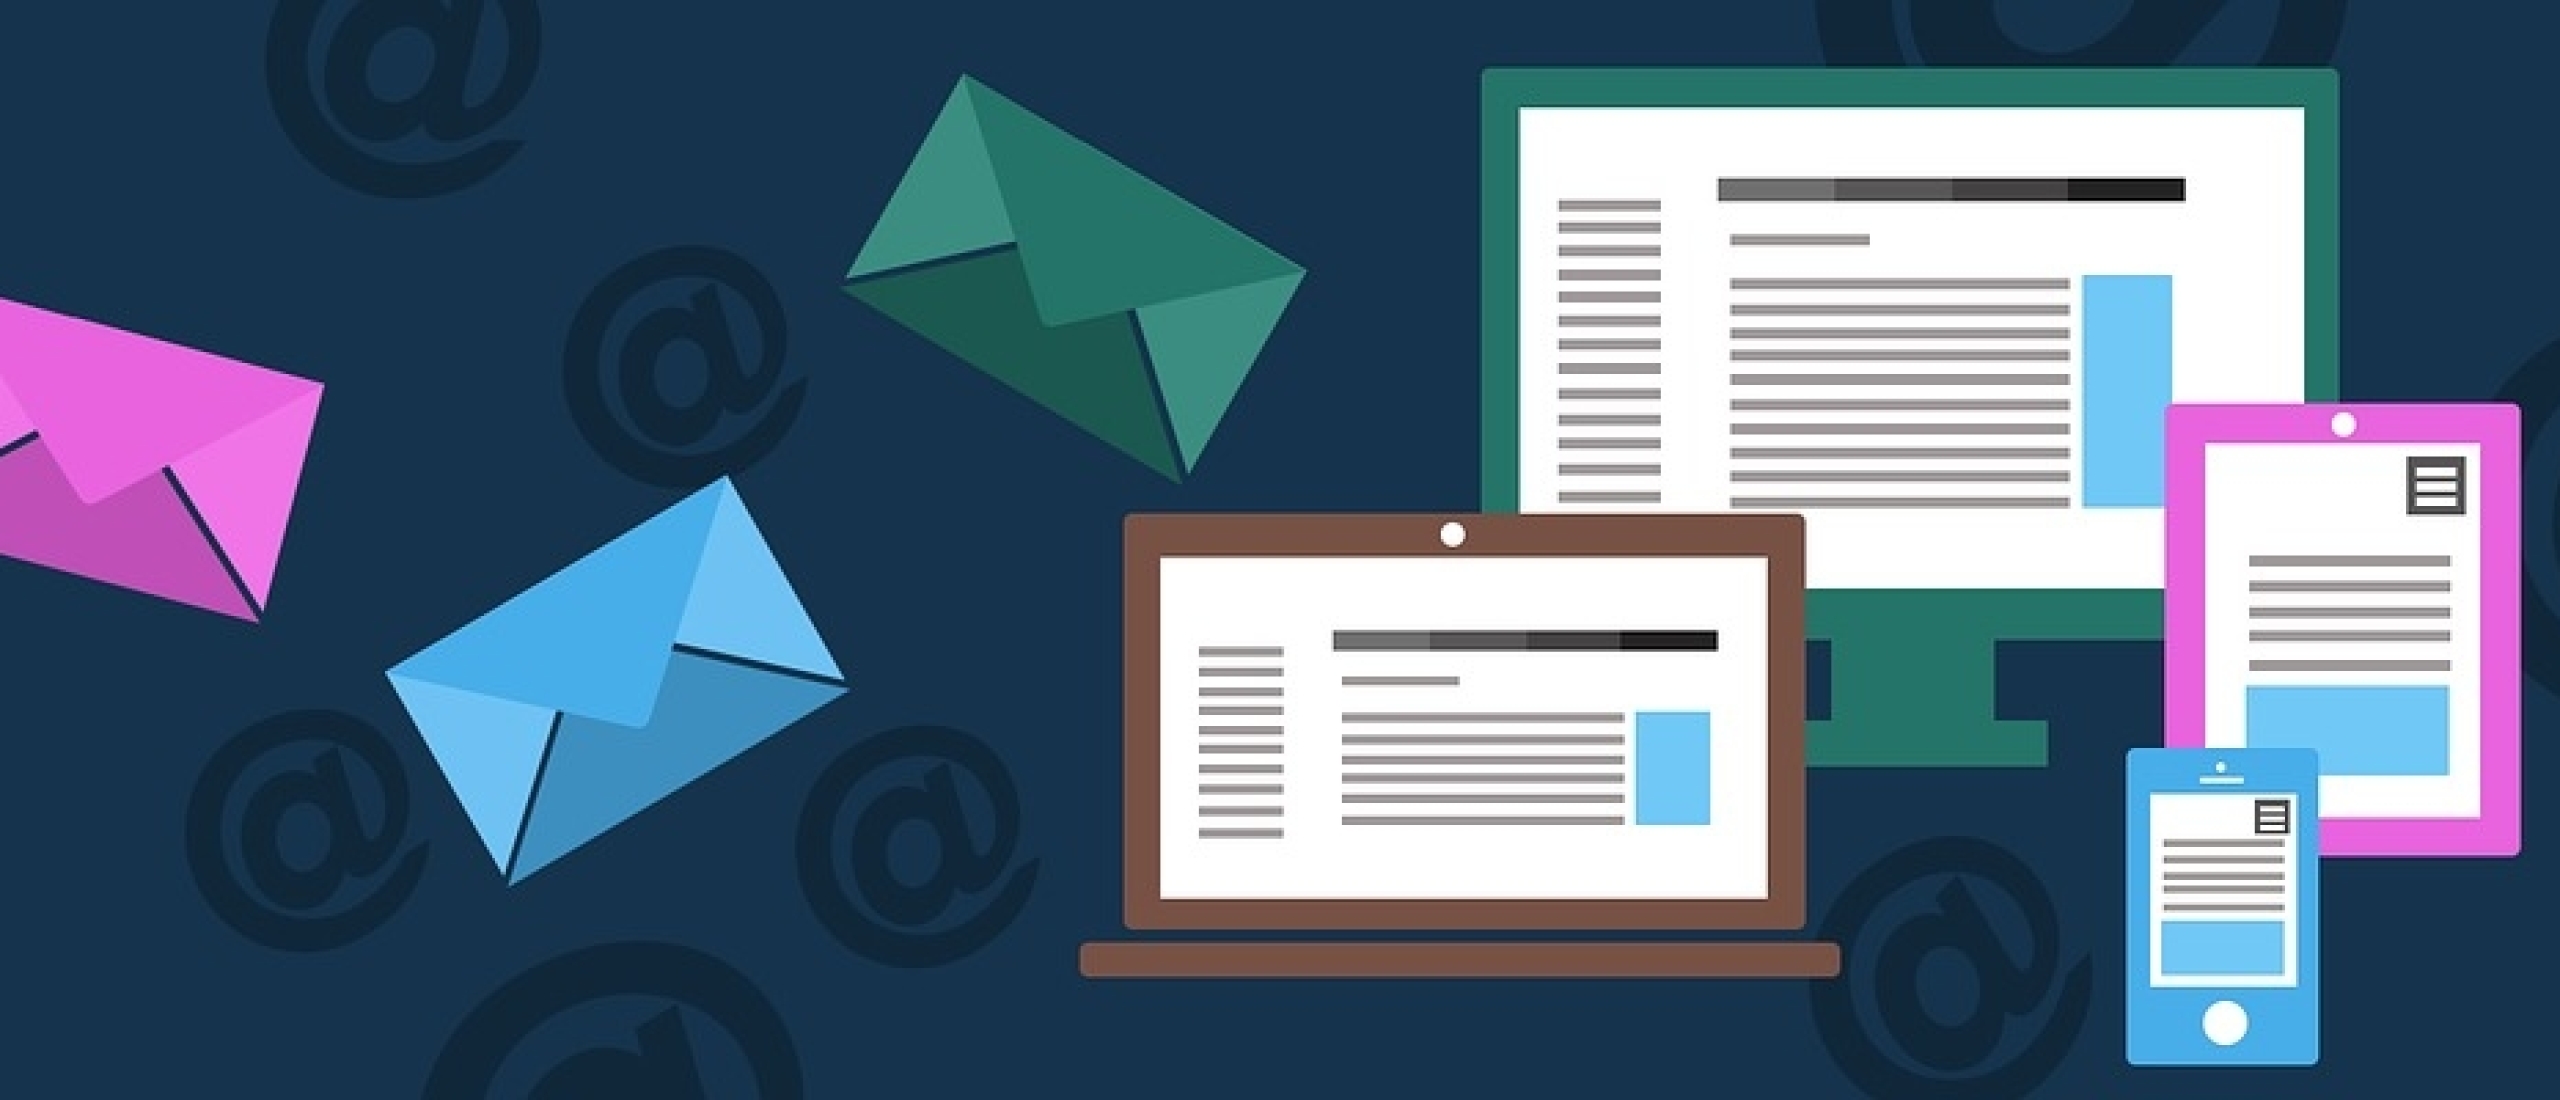 Review E-mail funnel kit van Prowinst voor e-mail marketing